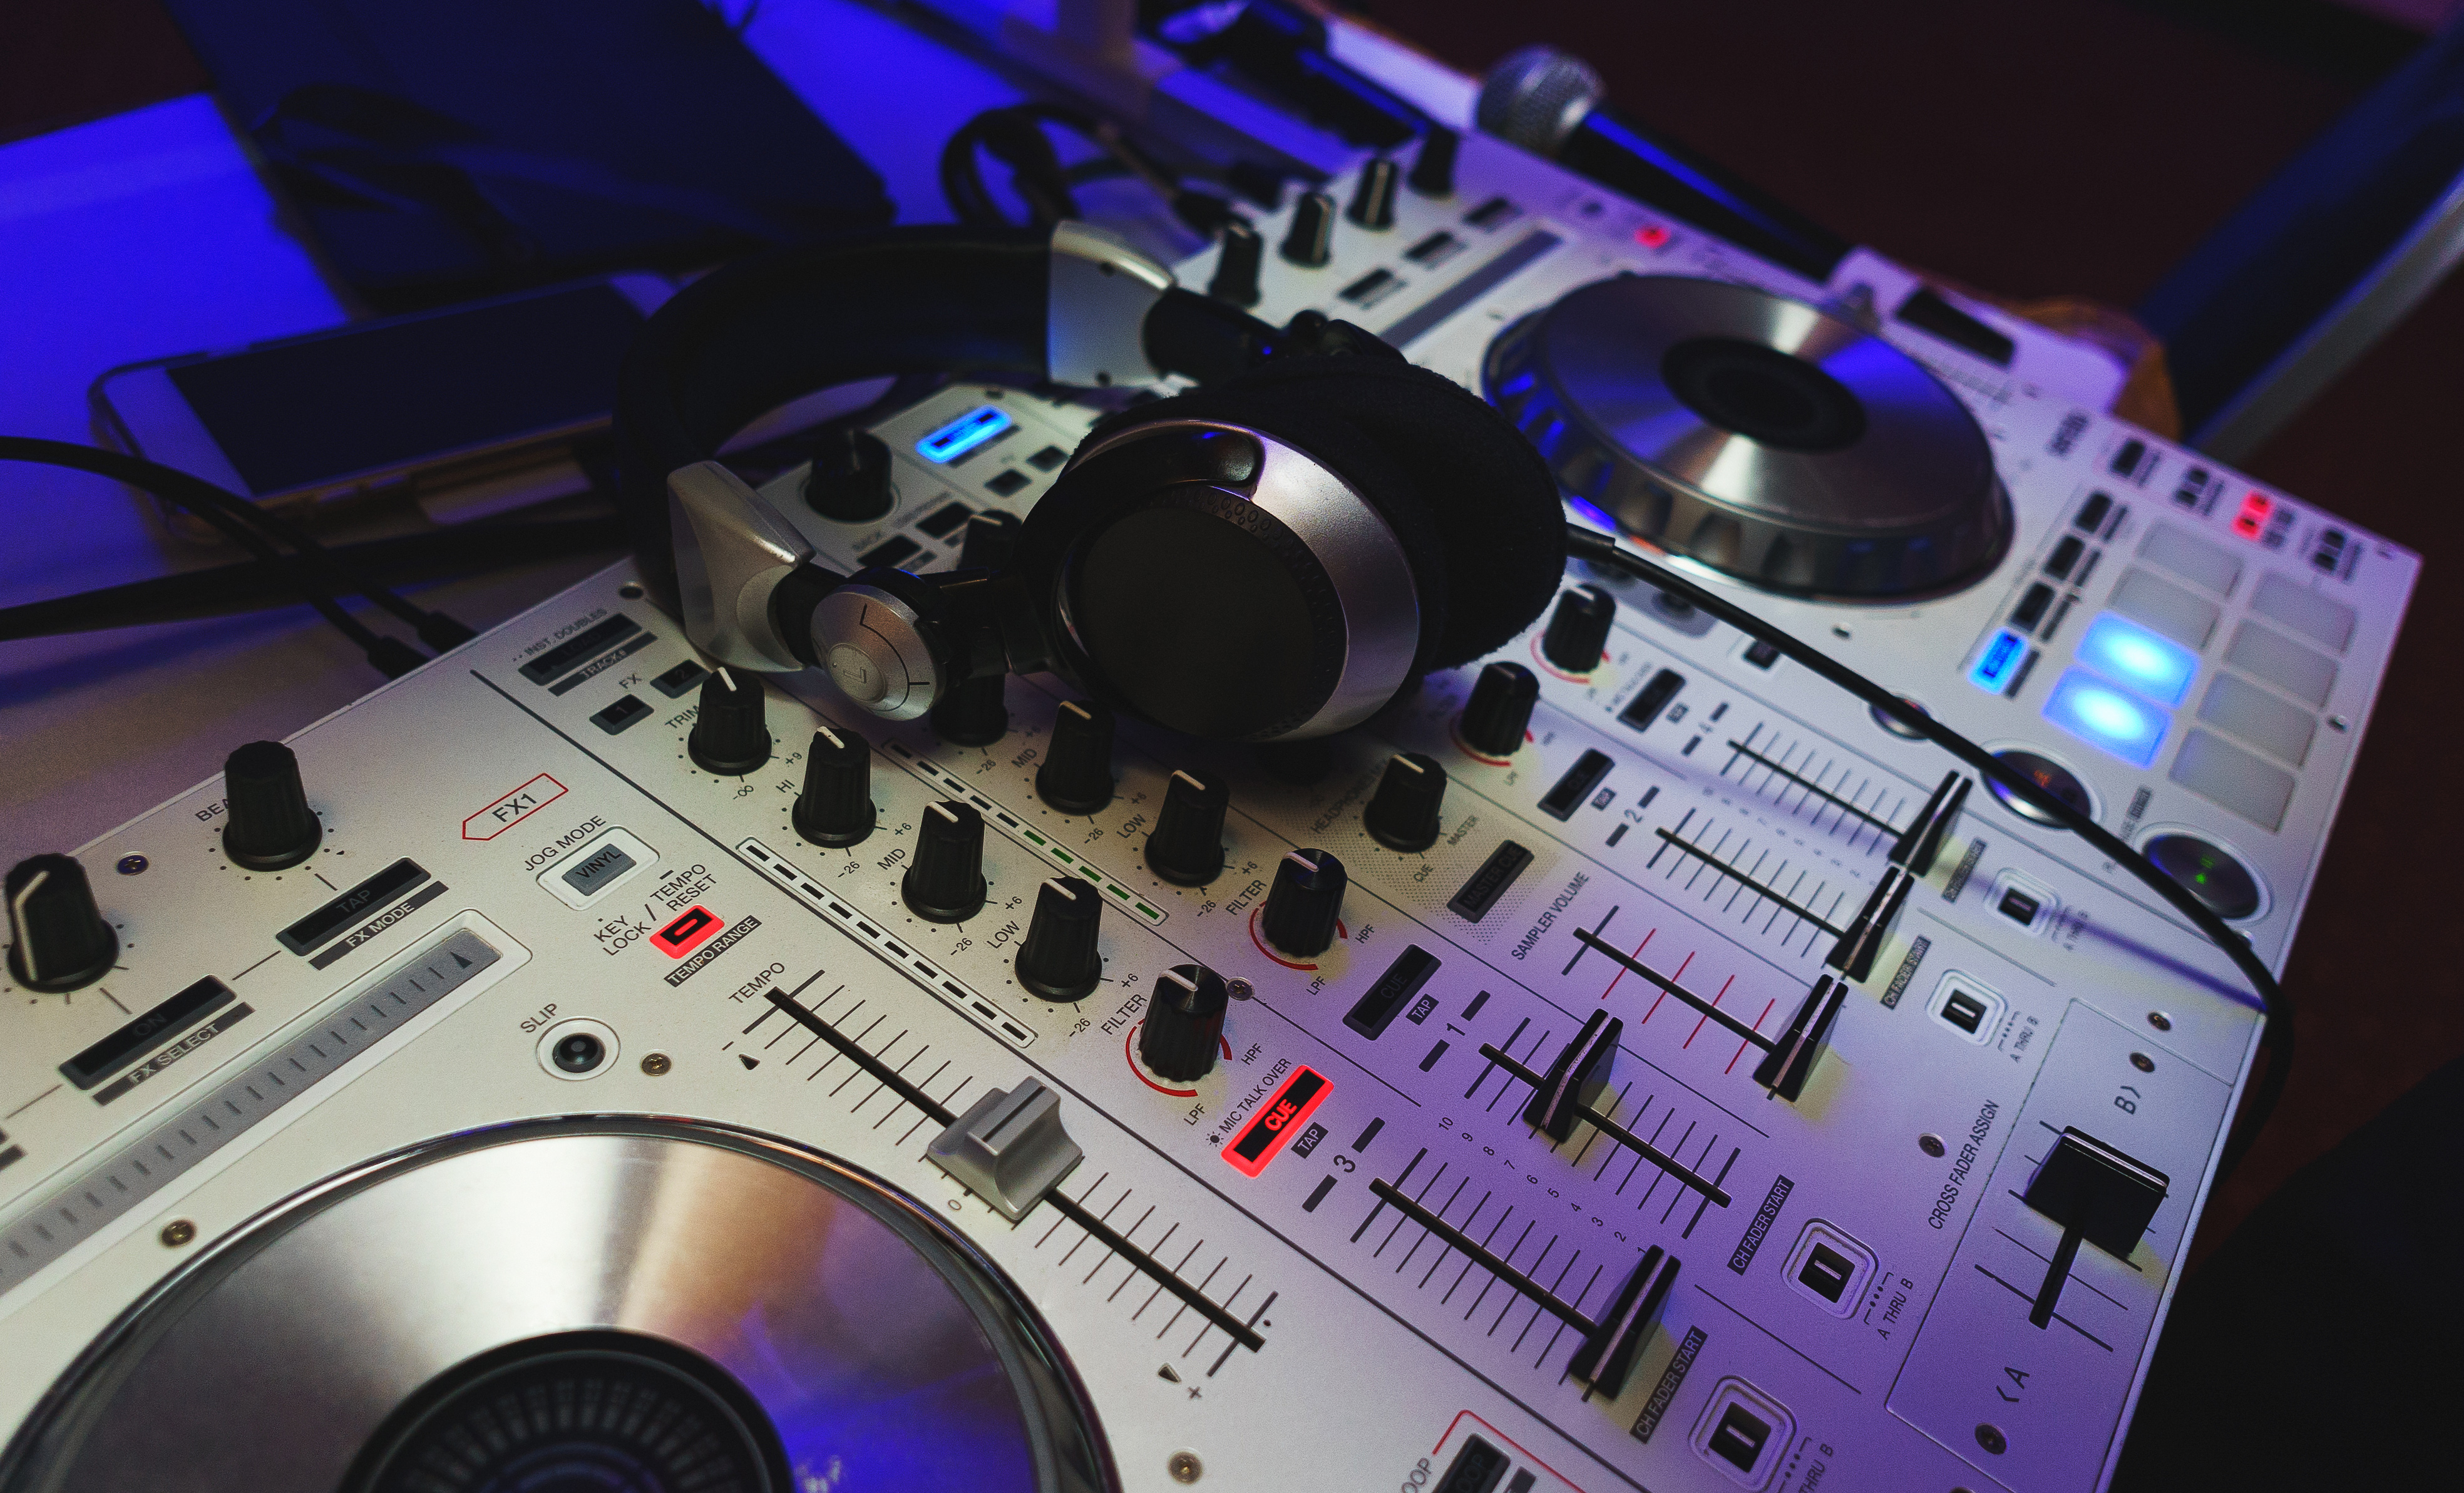 Setting up a professional DJ studio at home under ₹45,000